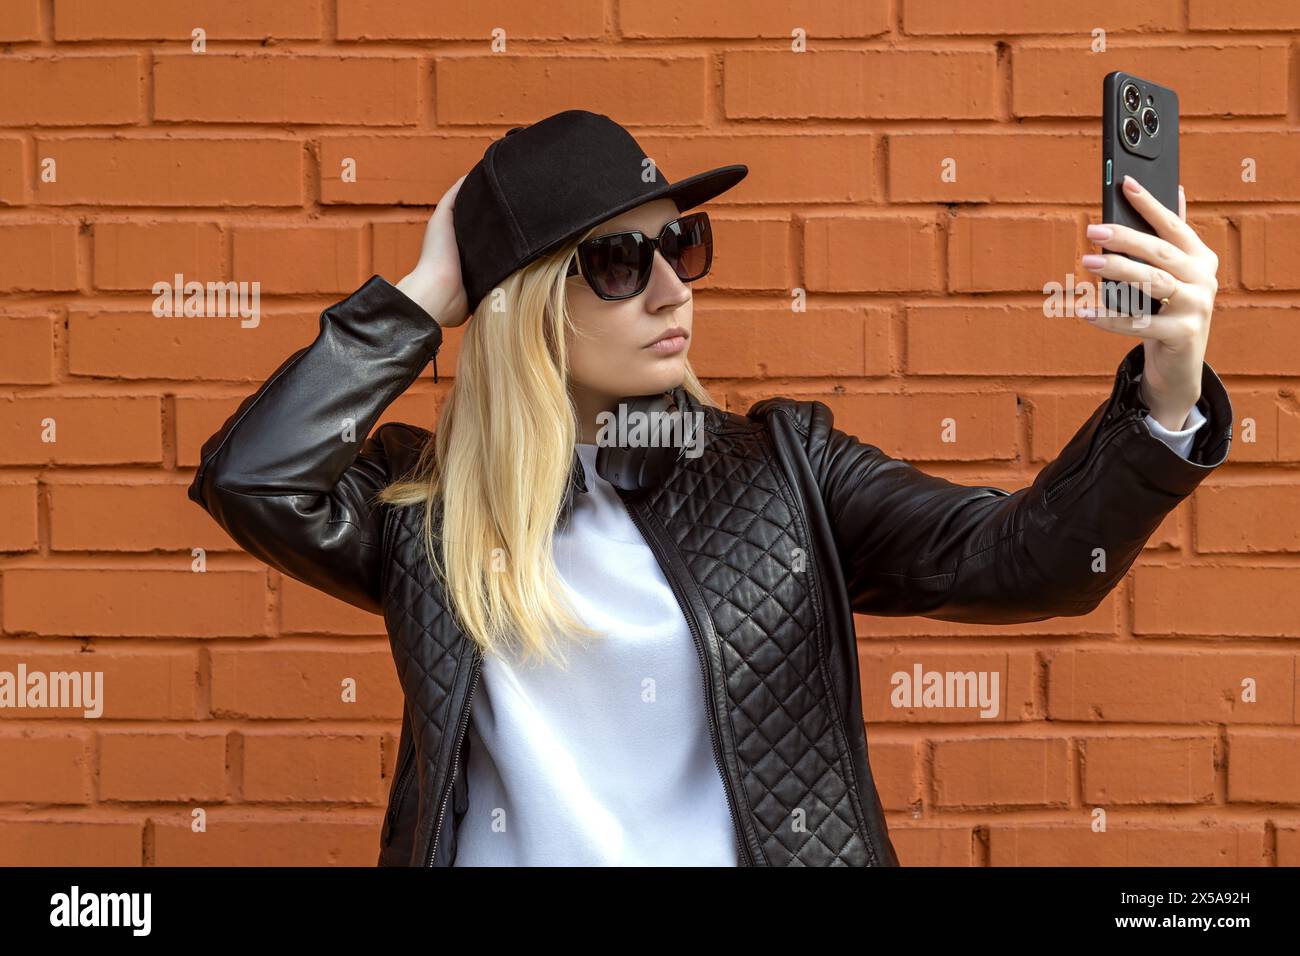 Fashionable young woman in a black leather jacket and hat taking a selfie with her smartphone against an orange brick wall background Stock Photo